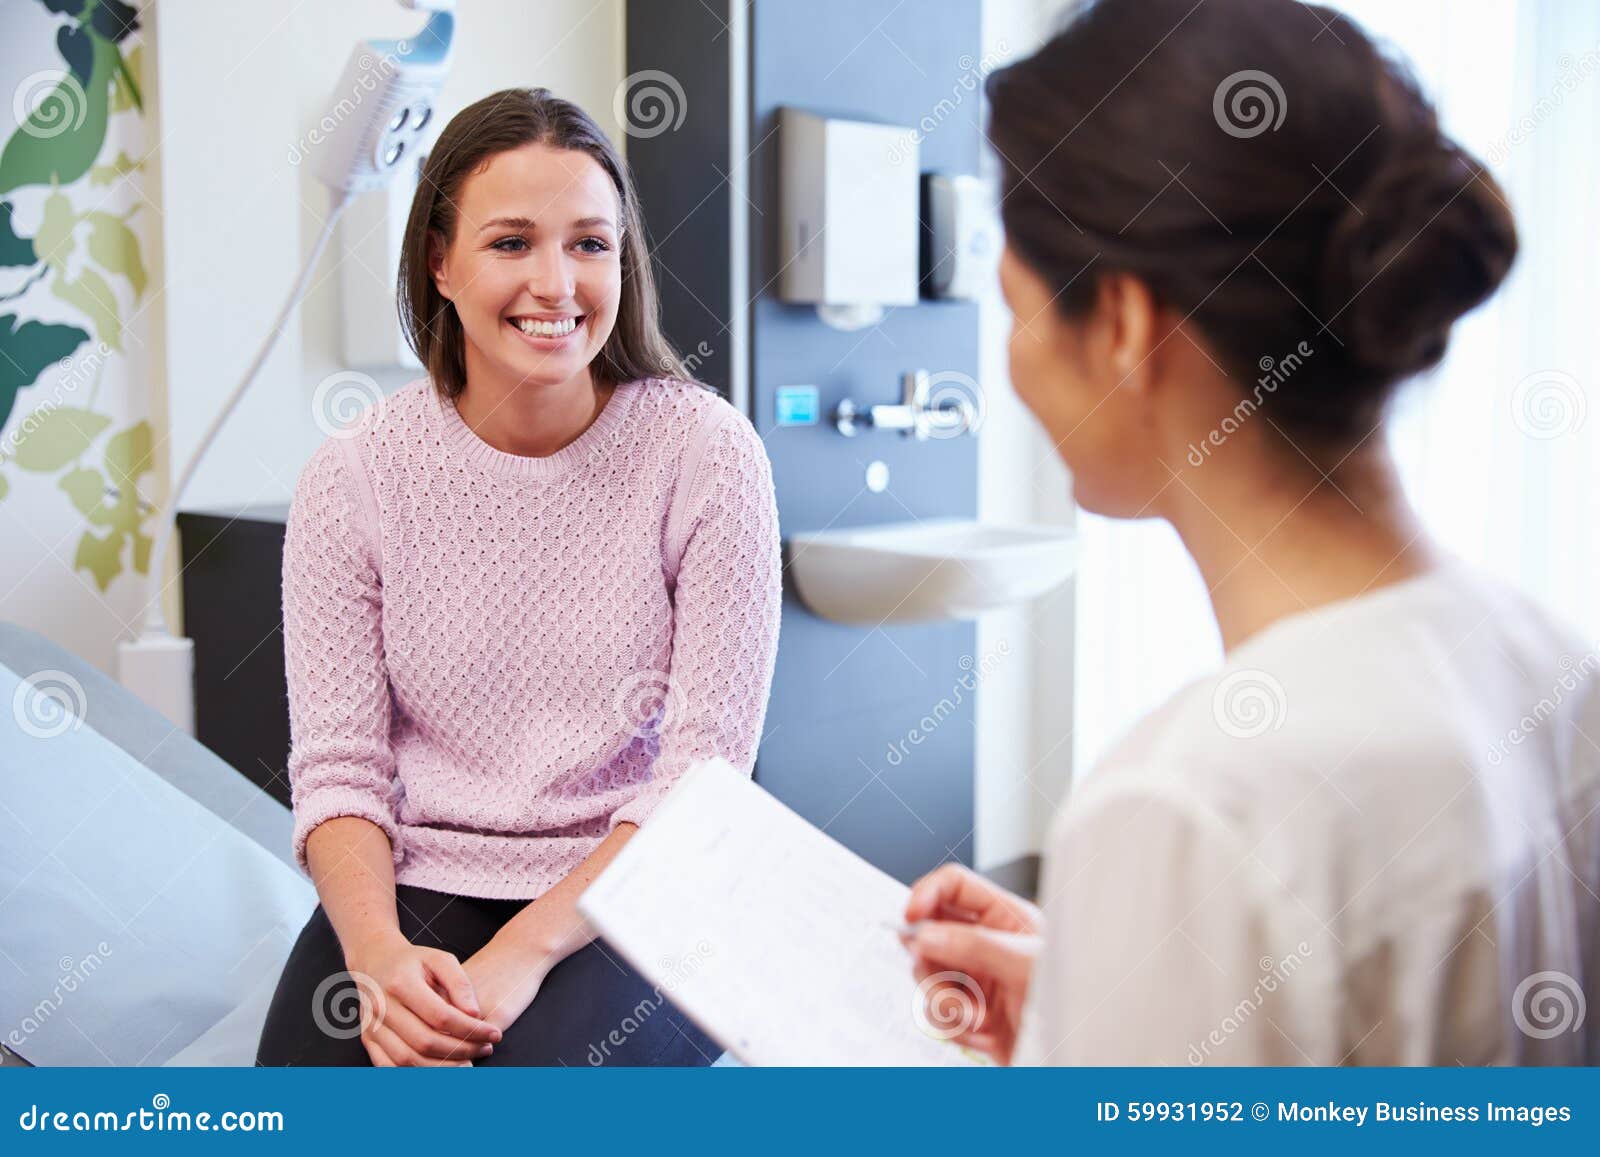 female patient and doctor have consultation in hospital room